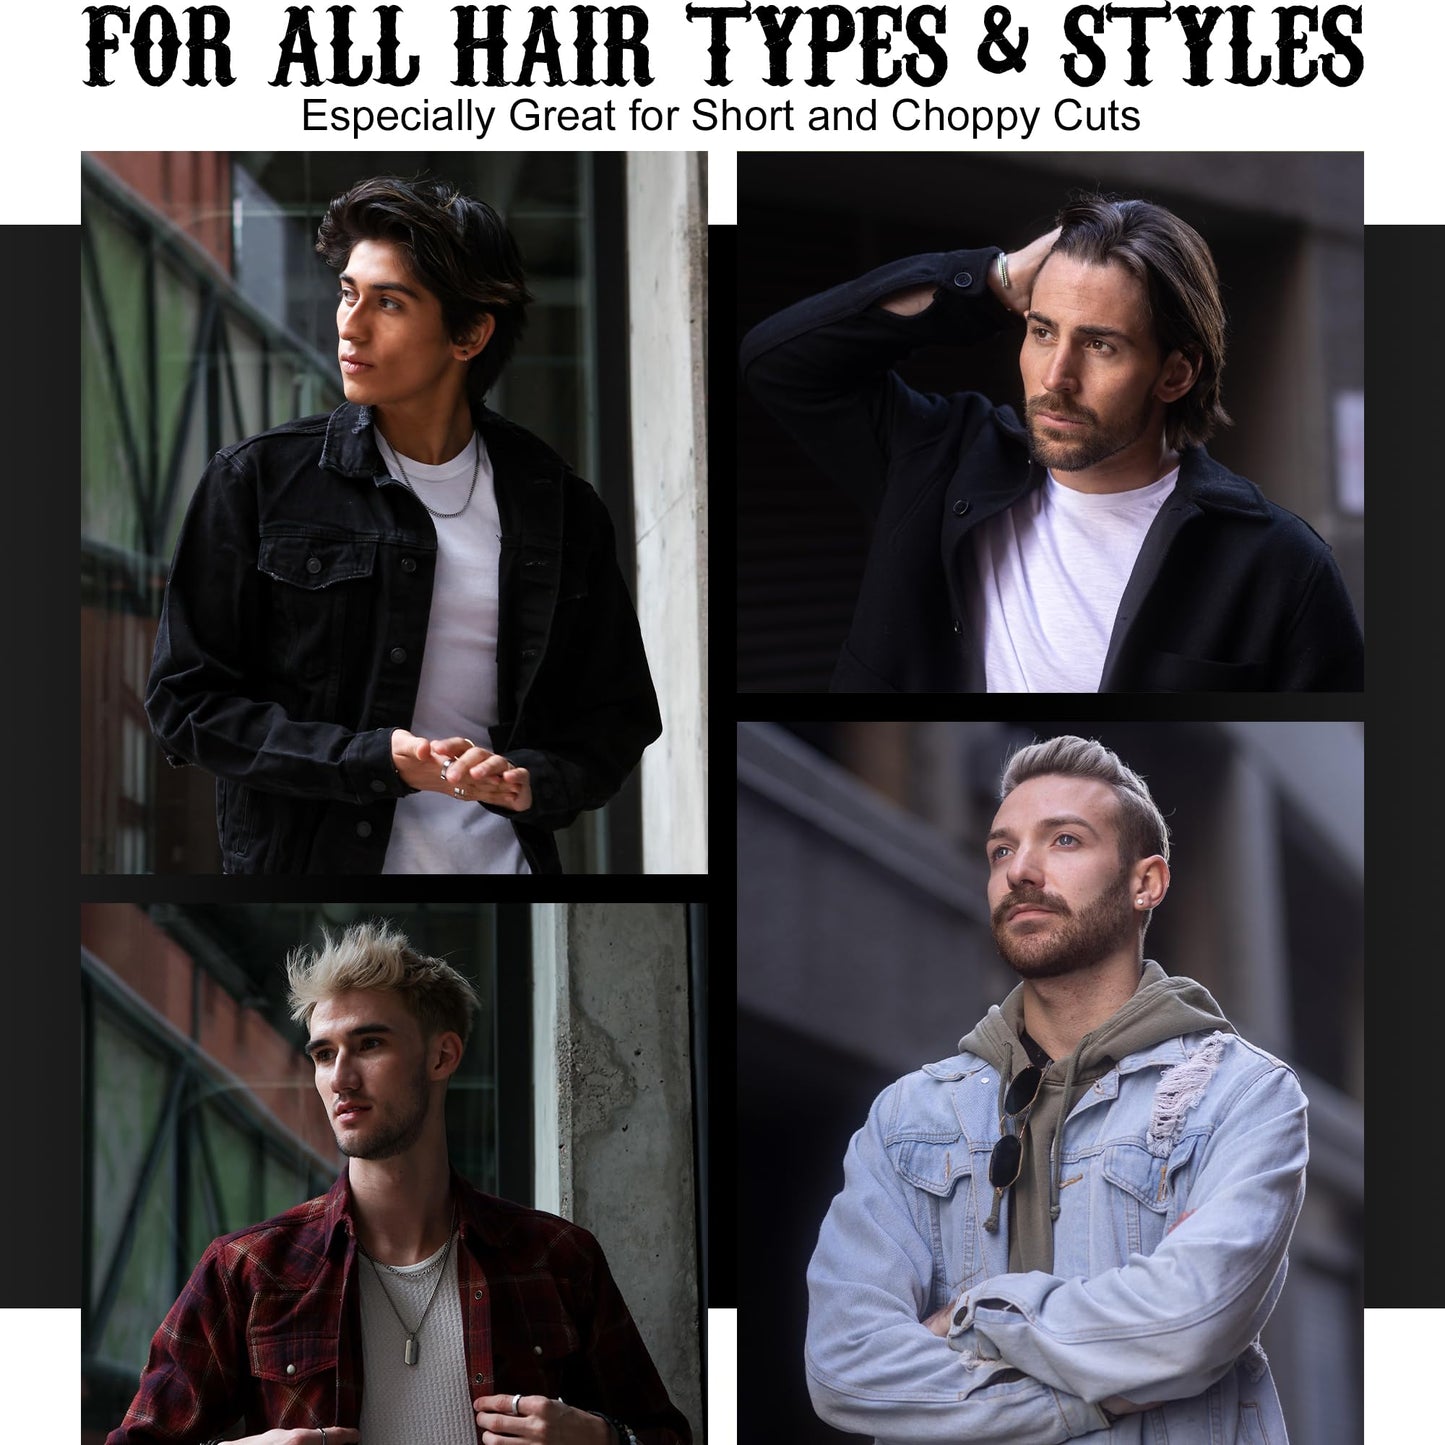 Fix Your Lid Styling Fiber for Men's Hair – High Hold and Low Shine with Matte Finish – Hair Fiber for all Mens Hair Types & Styles - Easy To Wash Out - 3.75 Oz